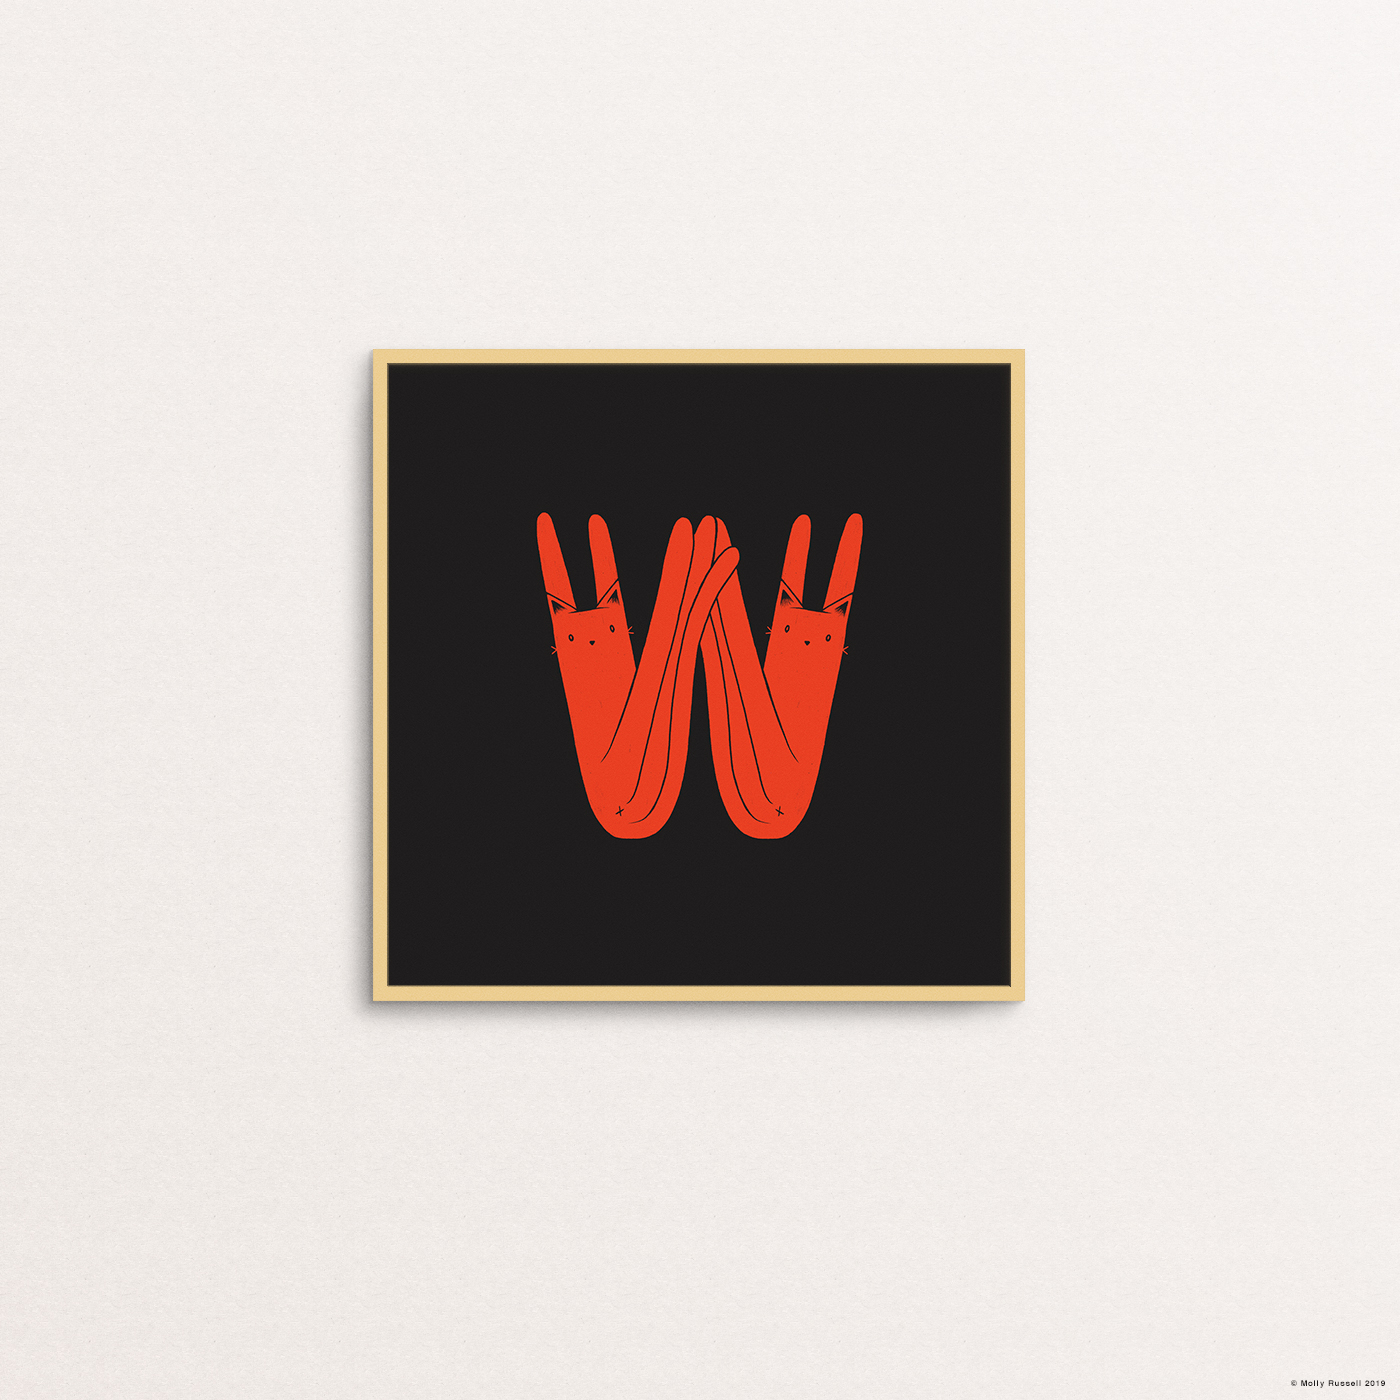 W is for Wiley.